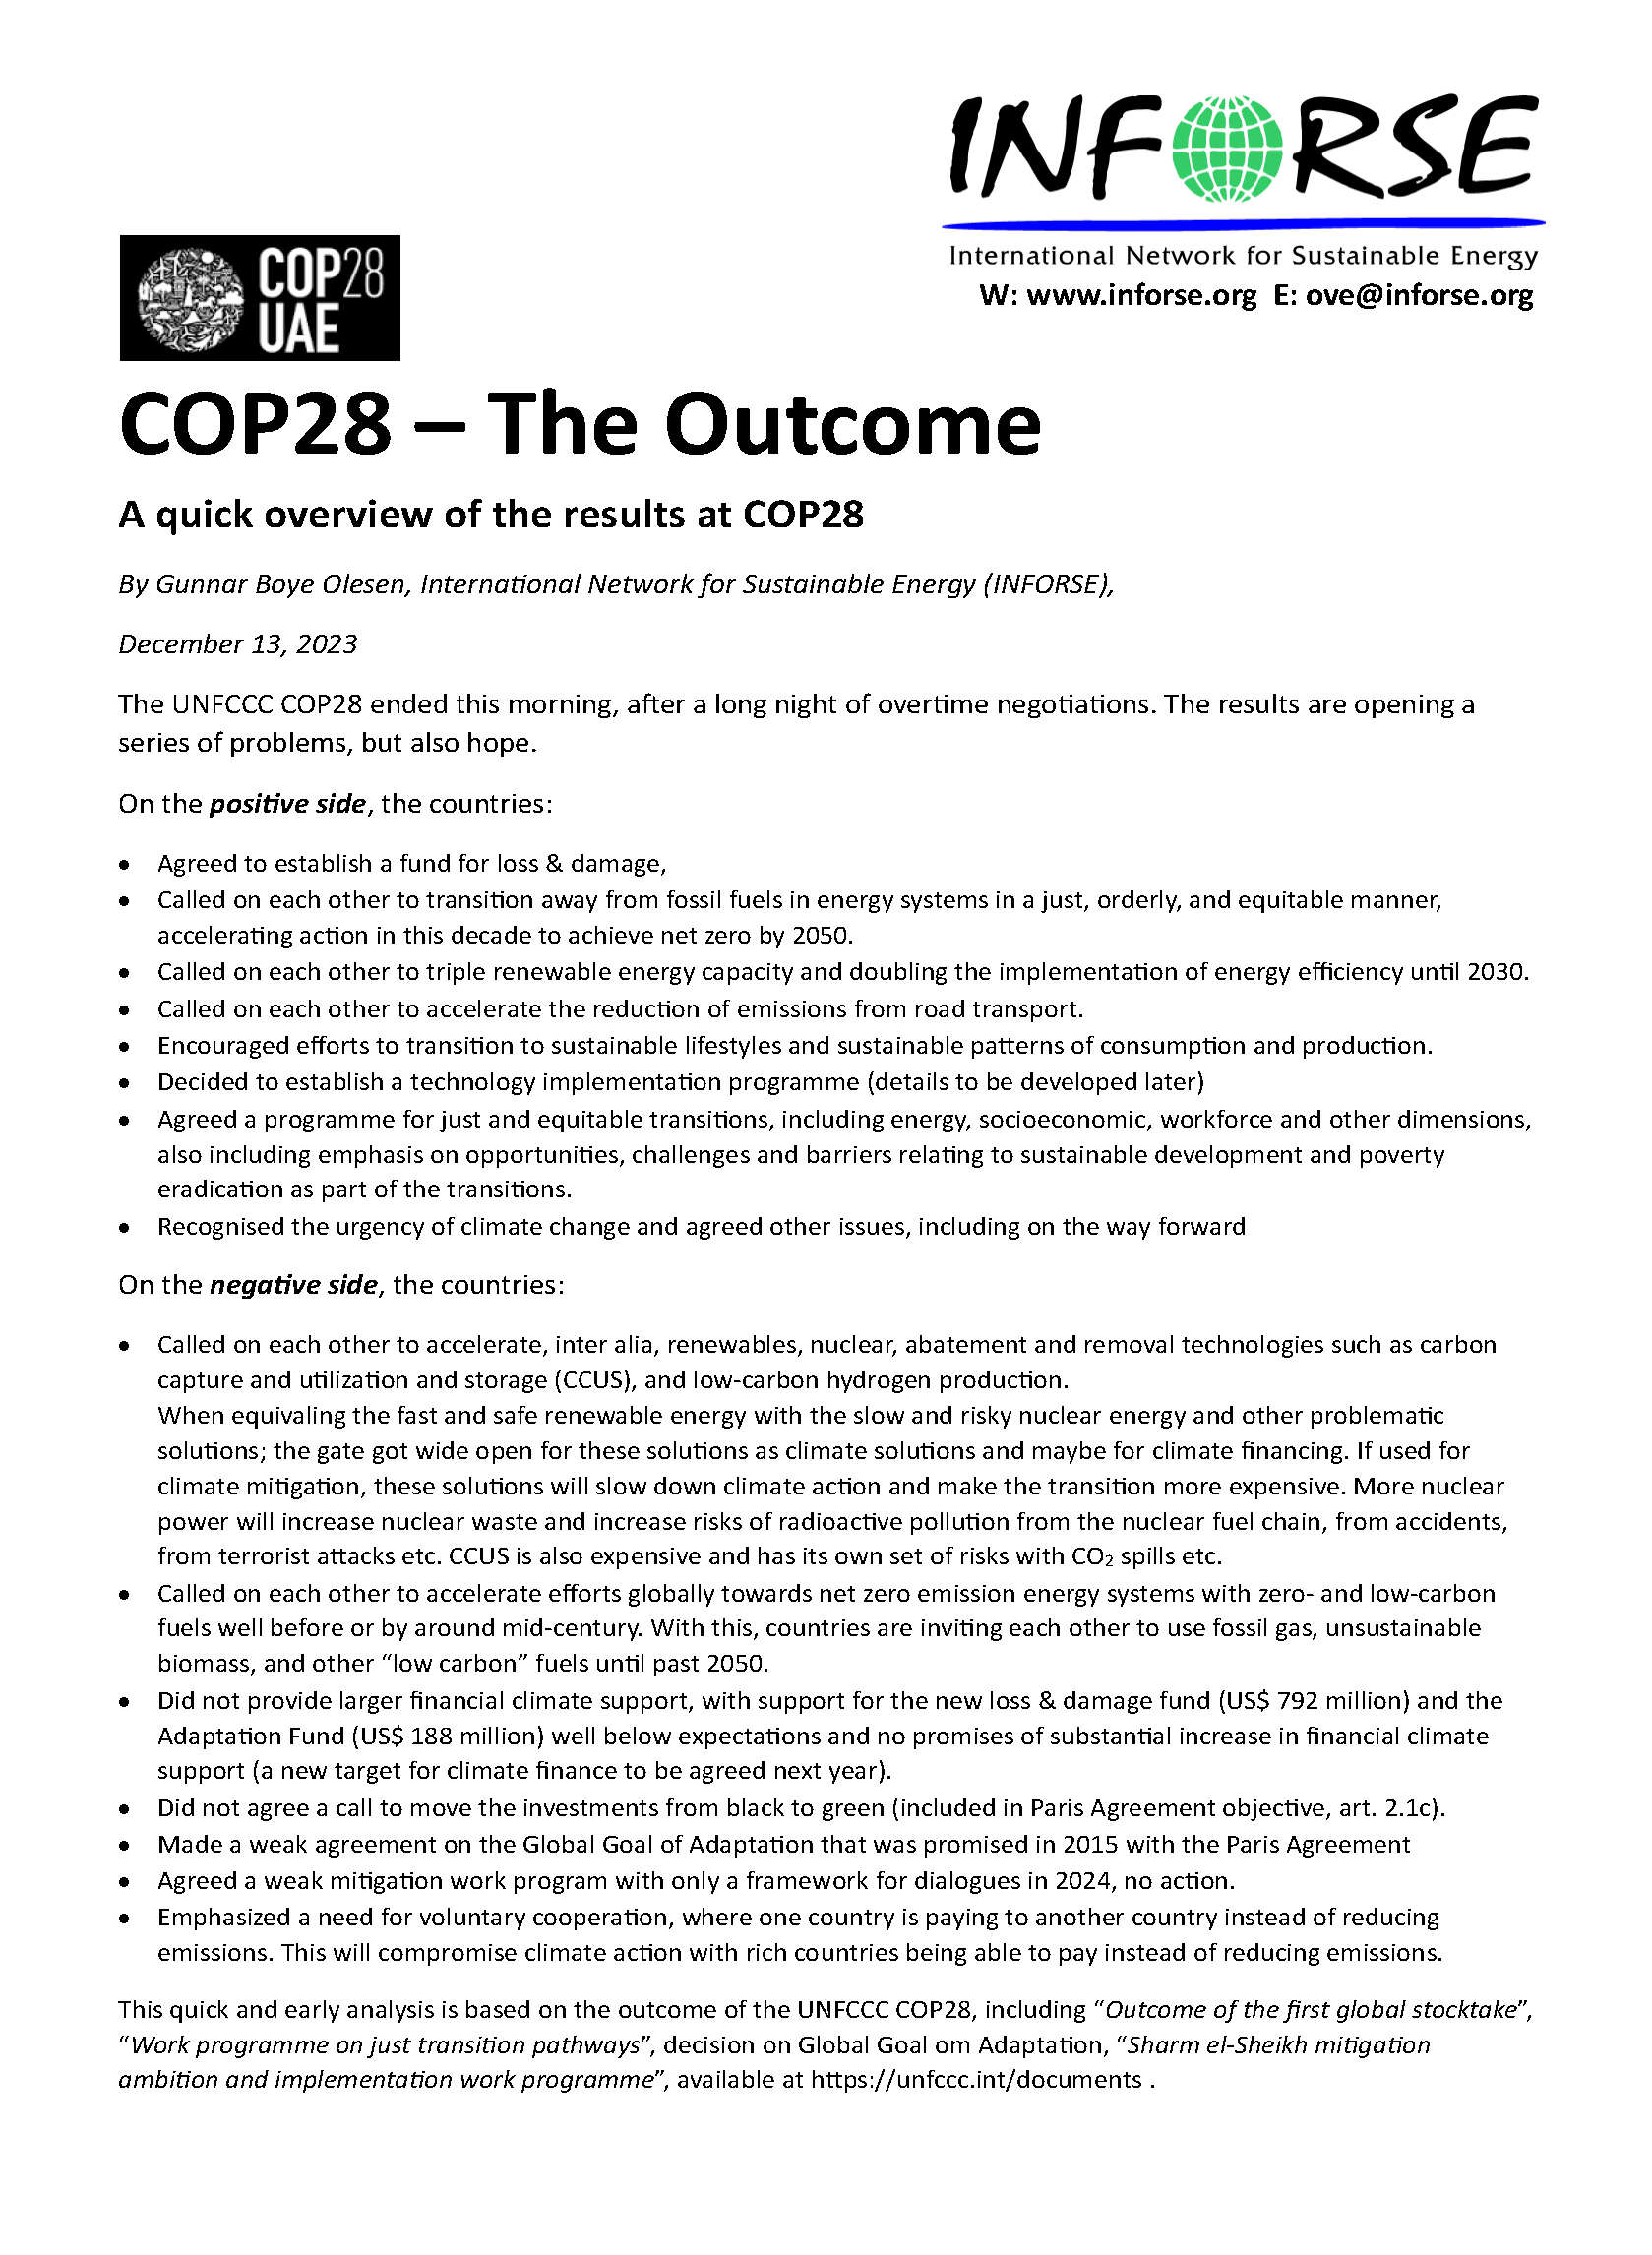 COP28 The Outcome Analysis by INFORS